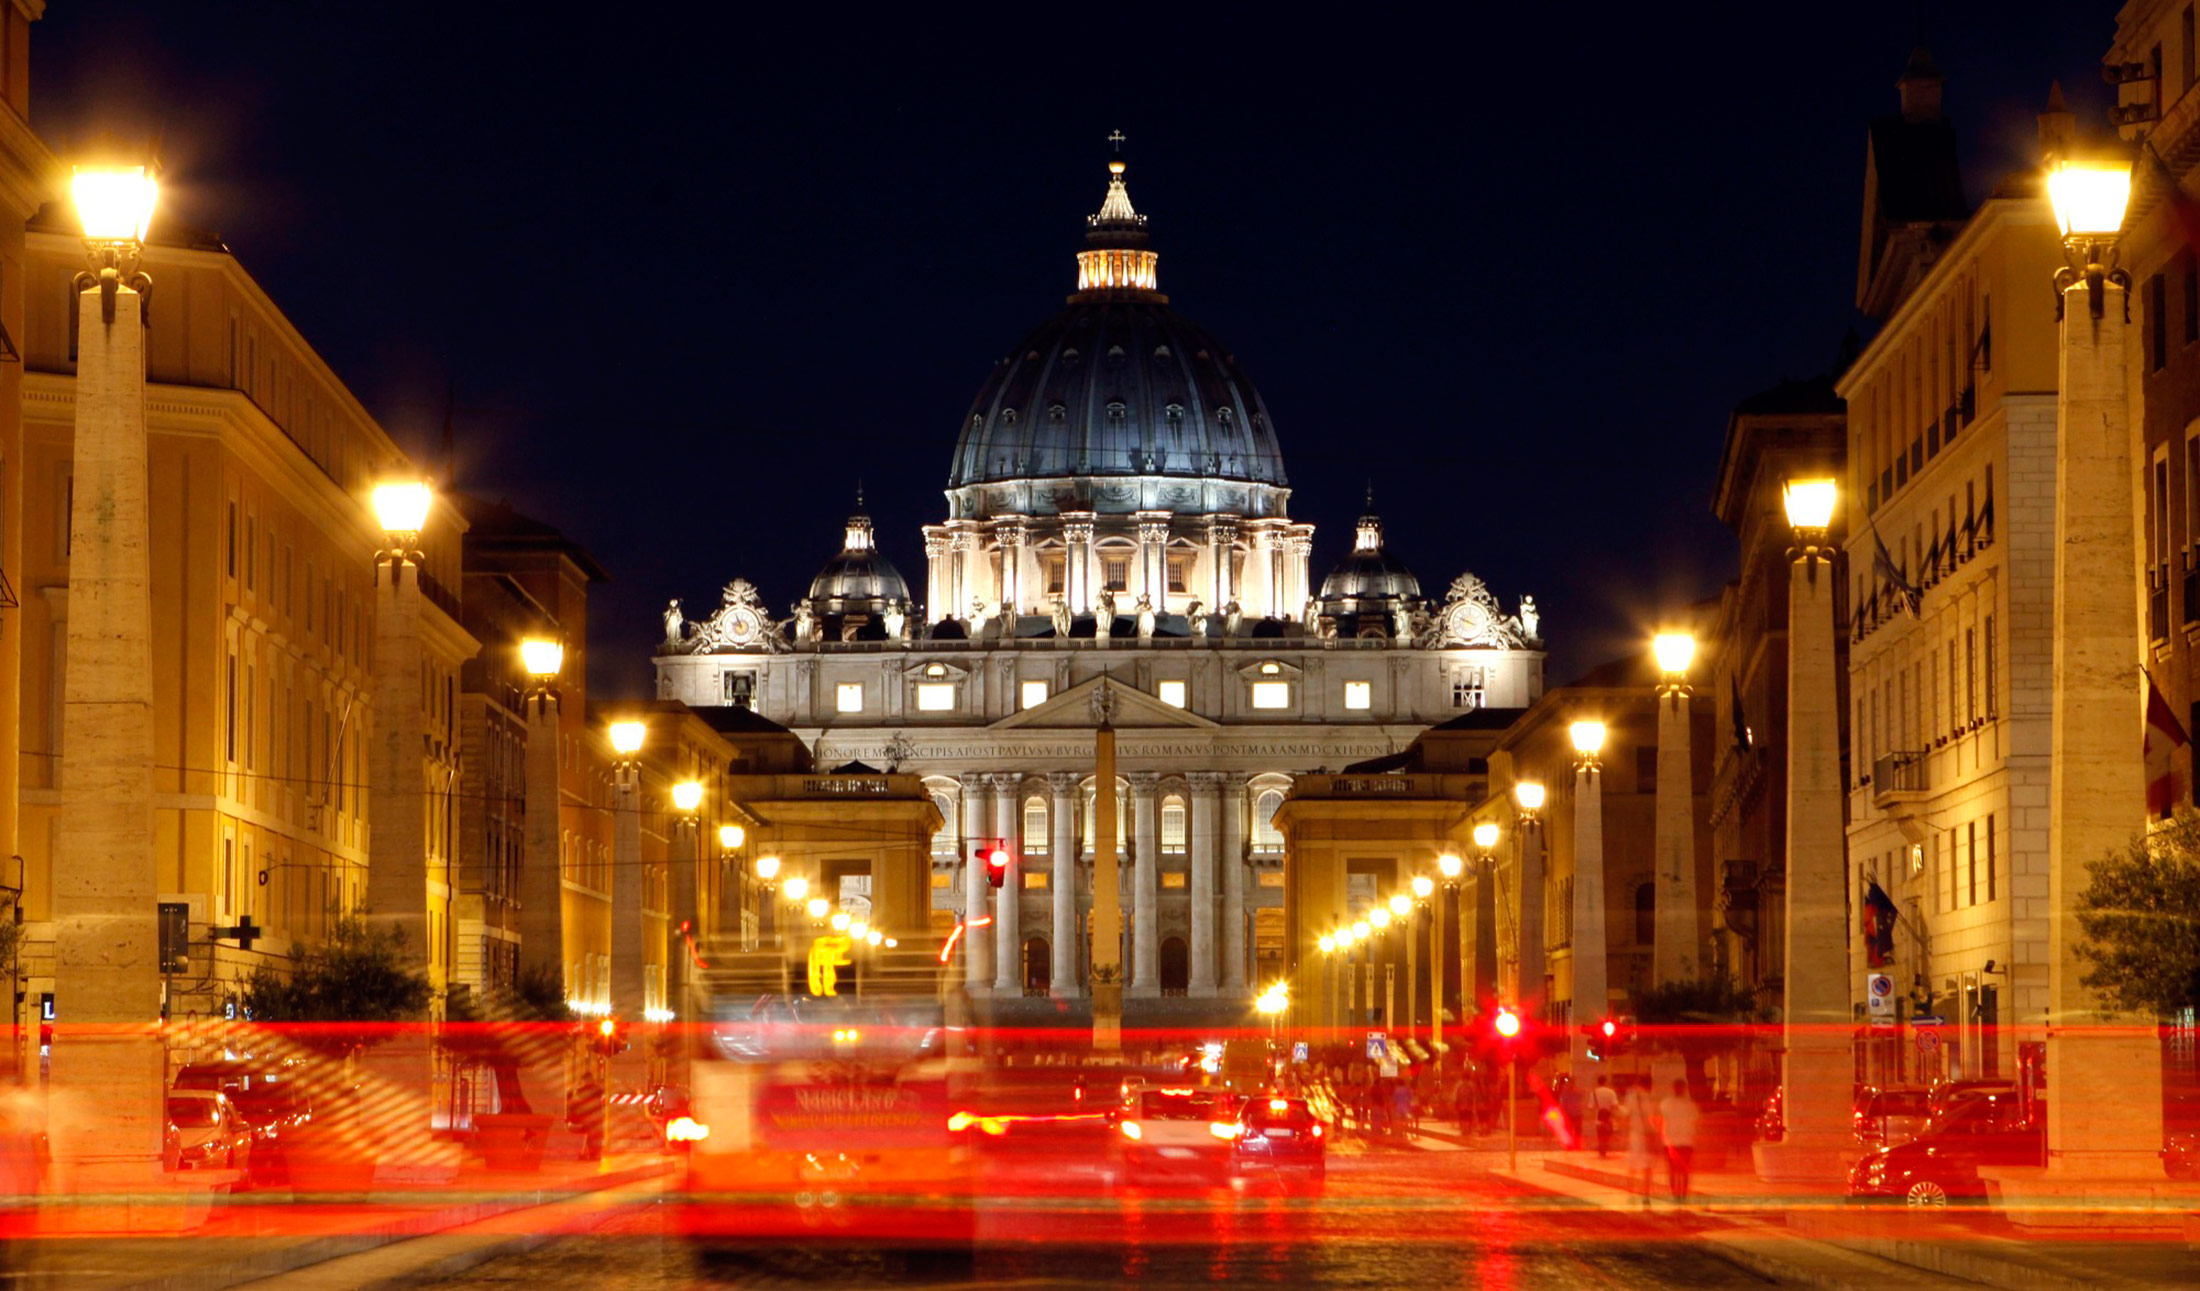 St. Peter's Basilica stands on the horizon in Rome.
